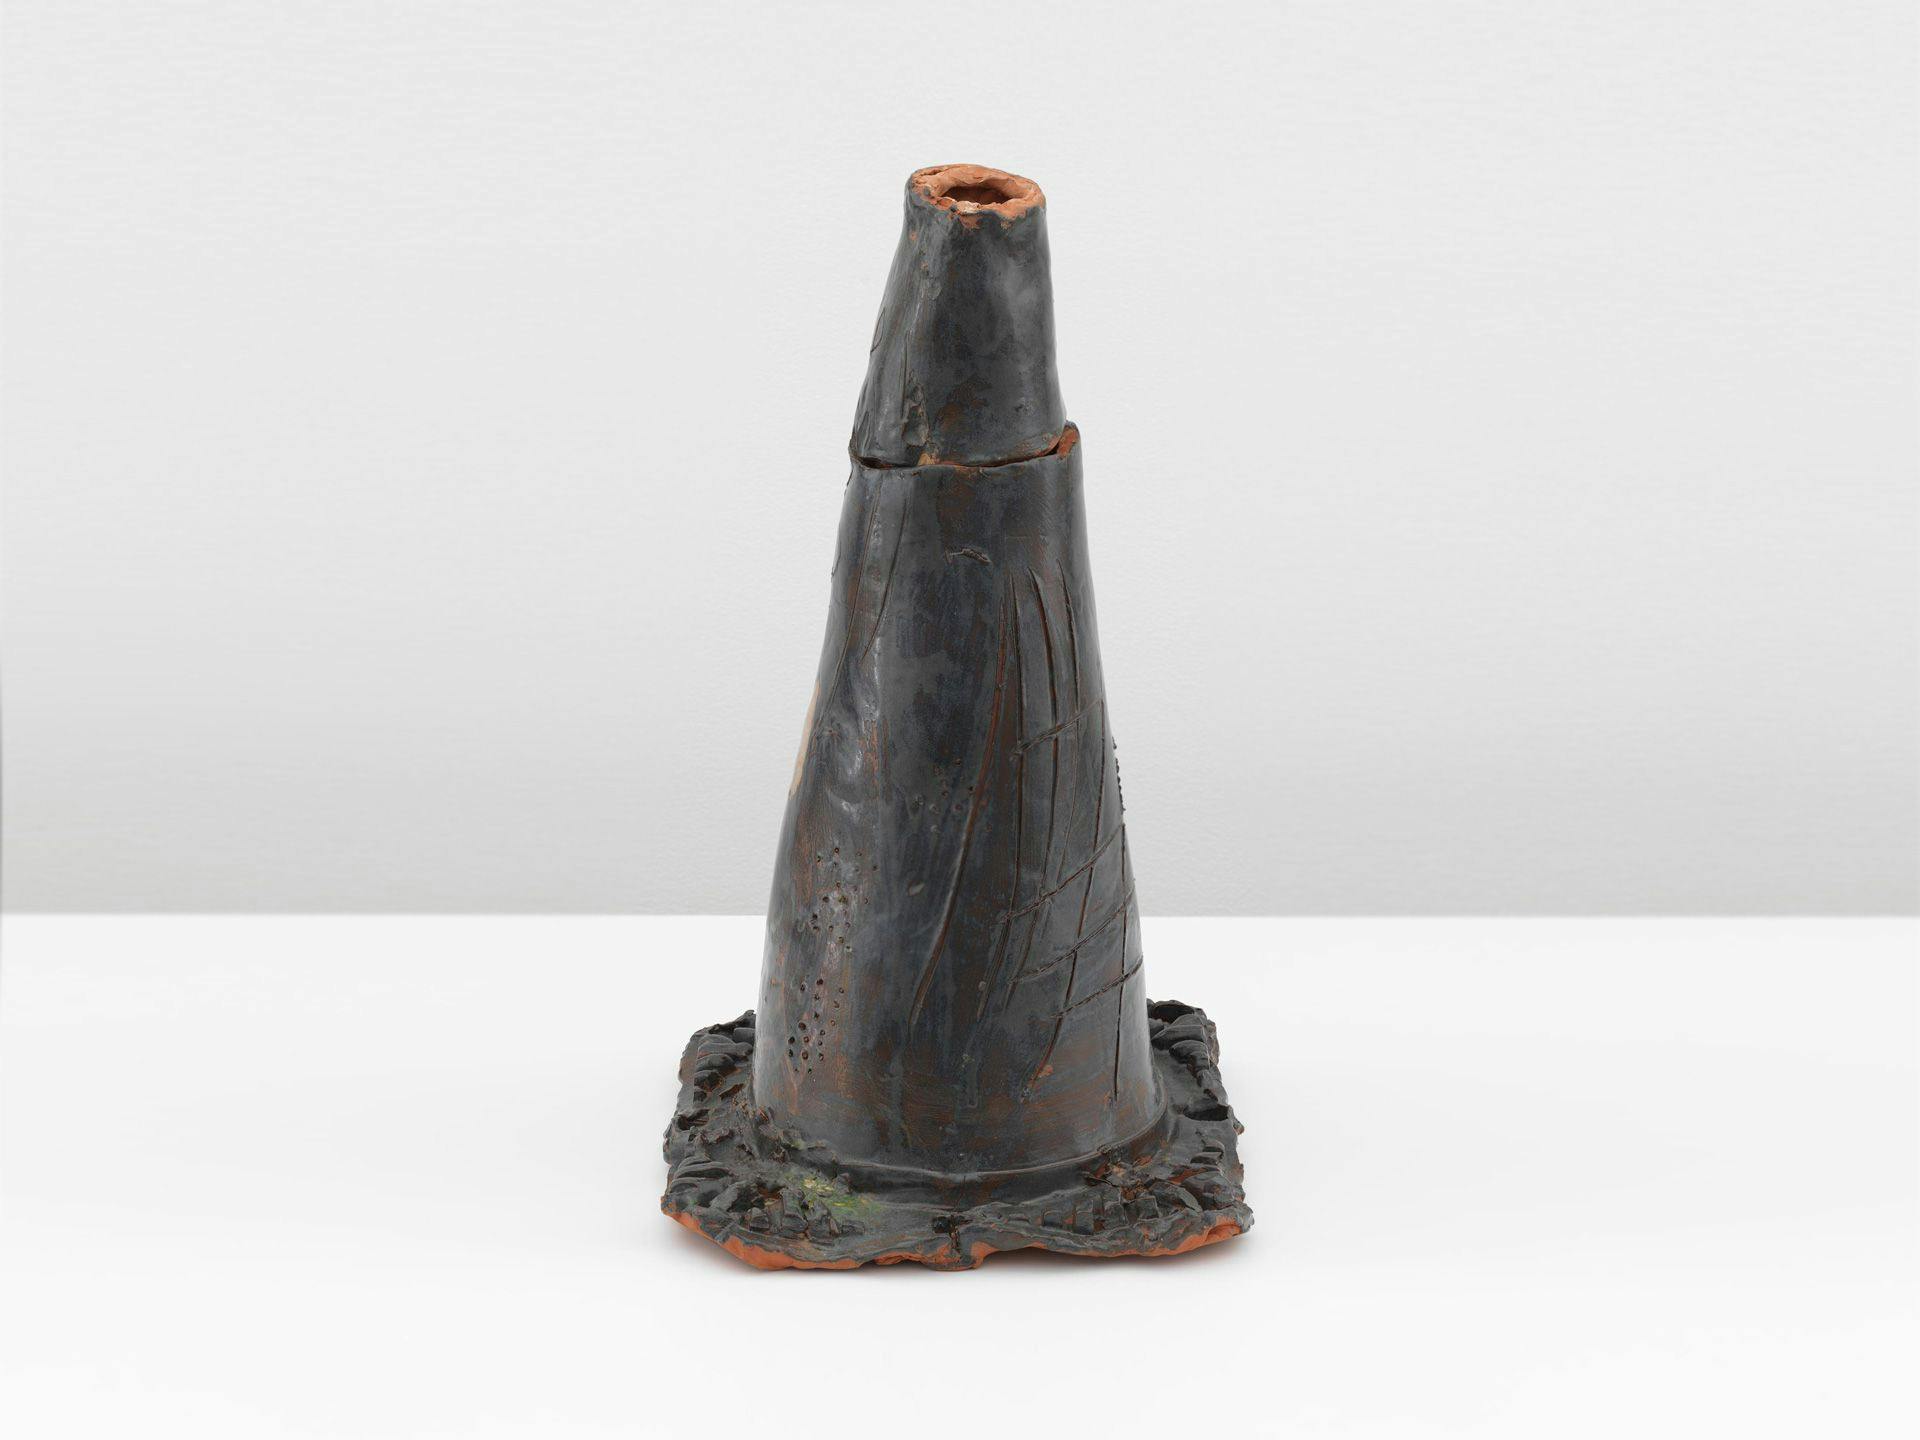 A ceramic sculpture by Josh Smith, titled Traffic Cone 12, dated 2019.